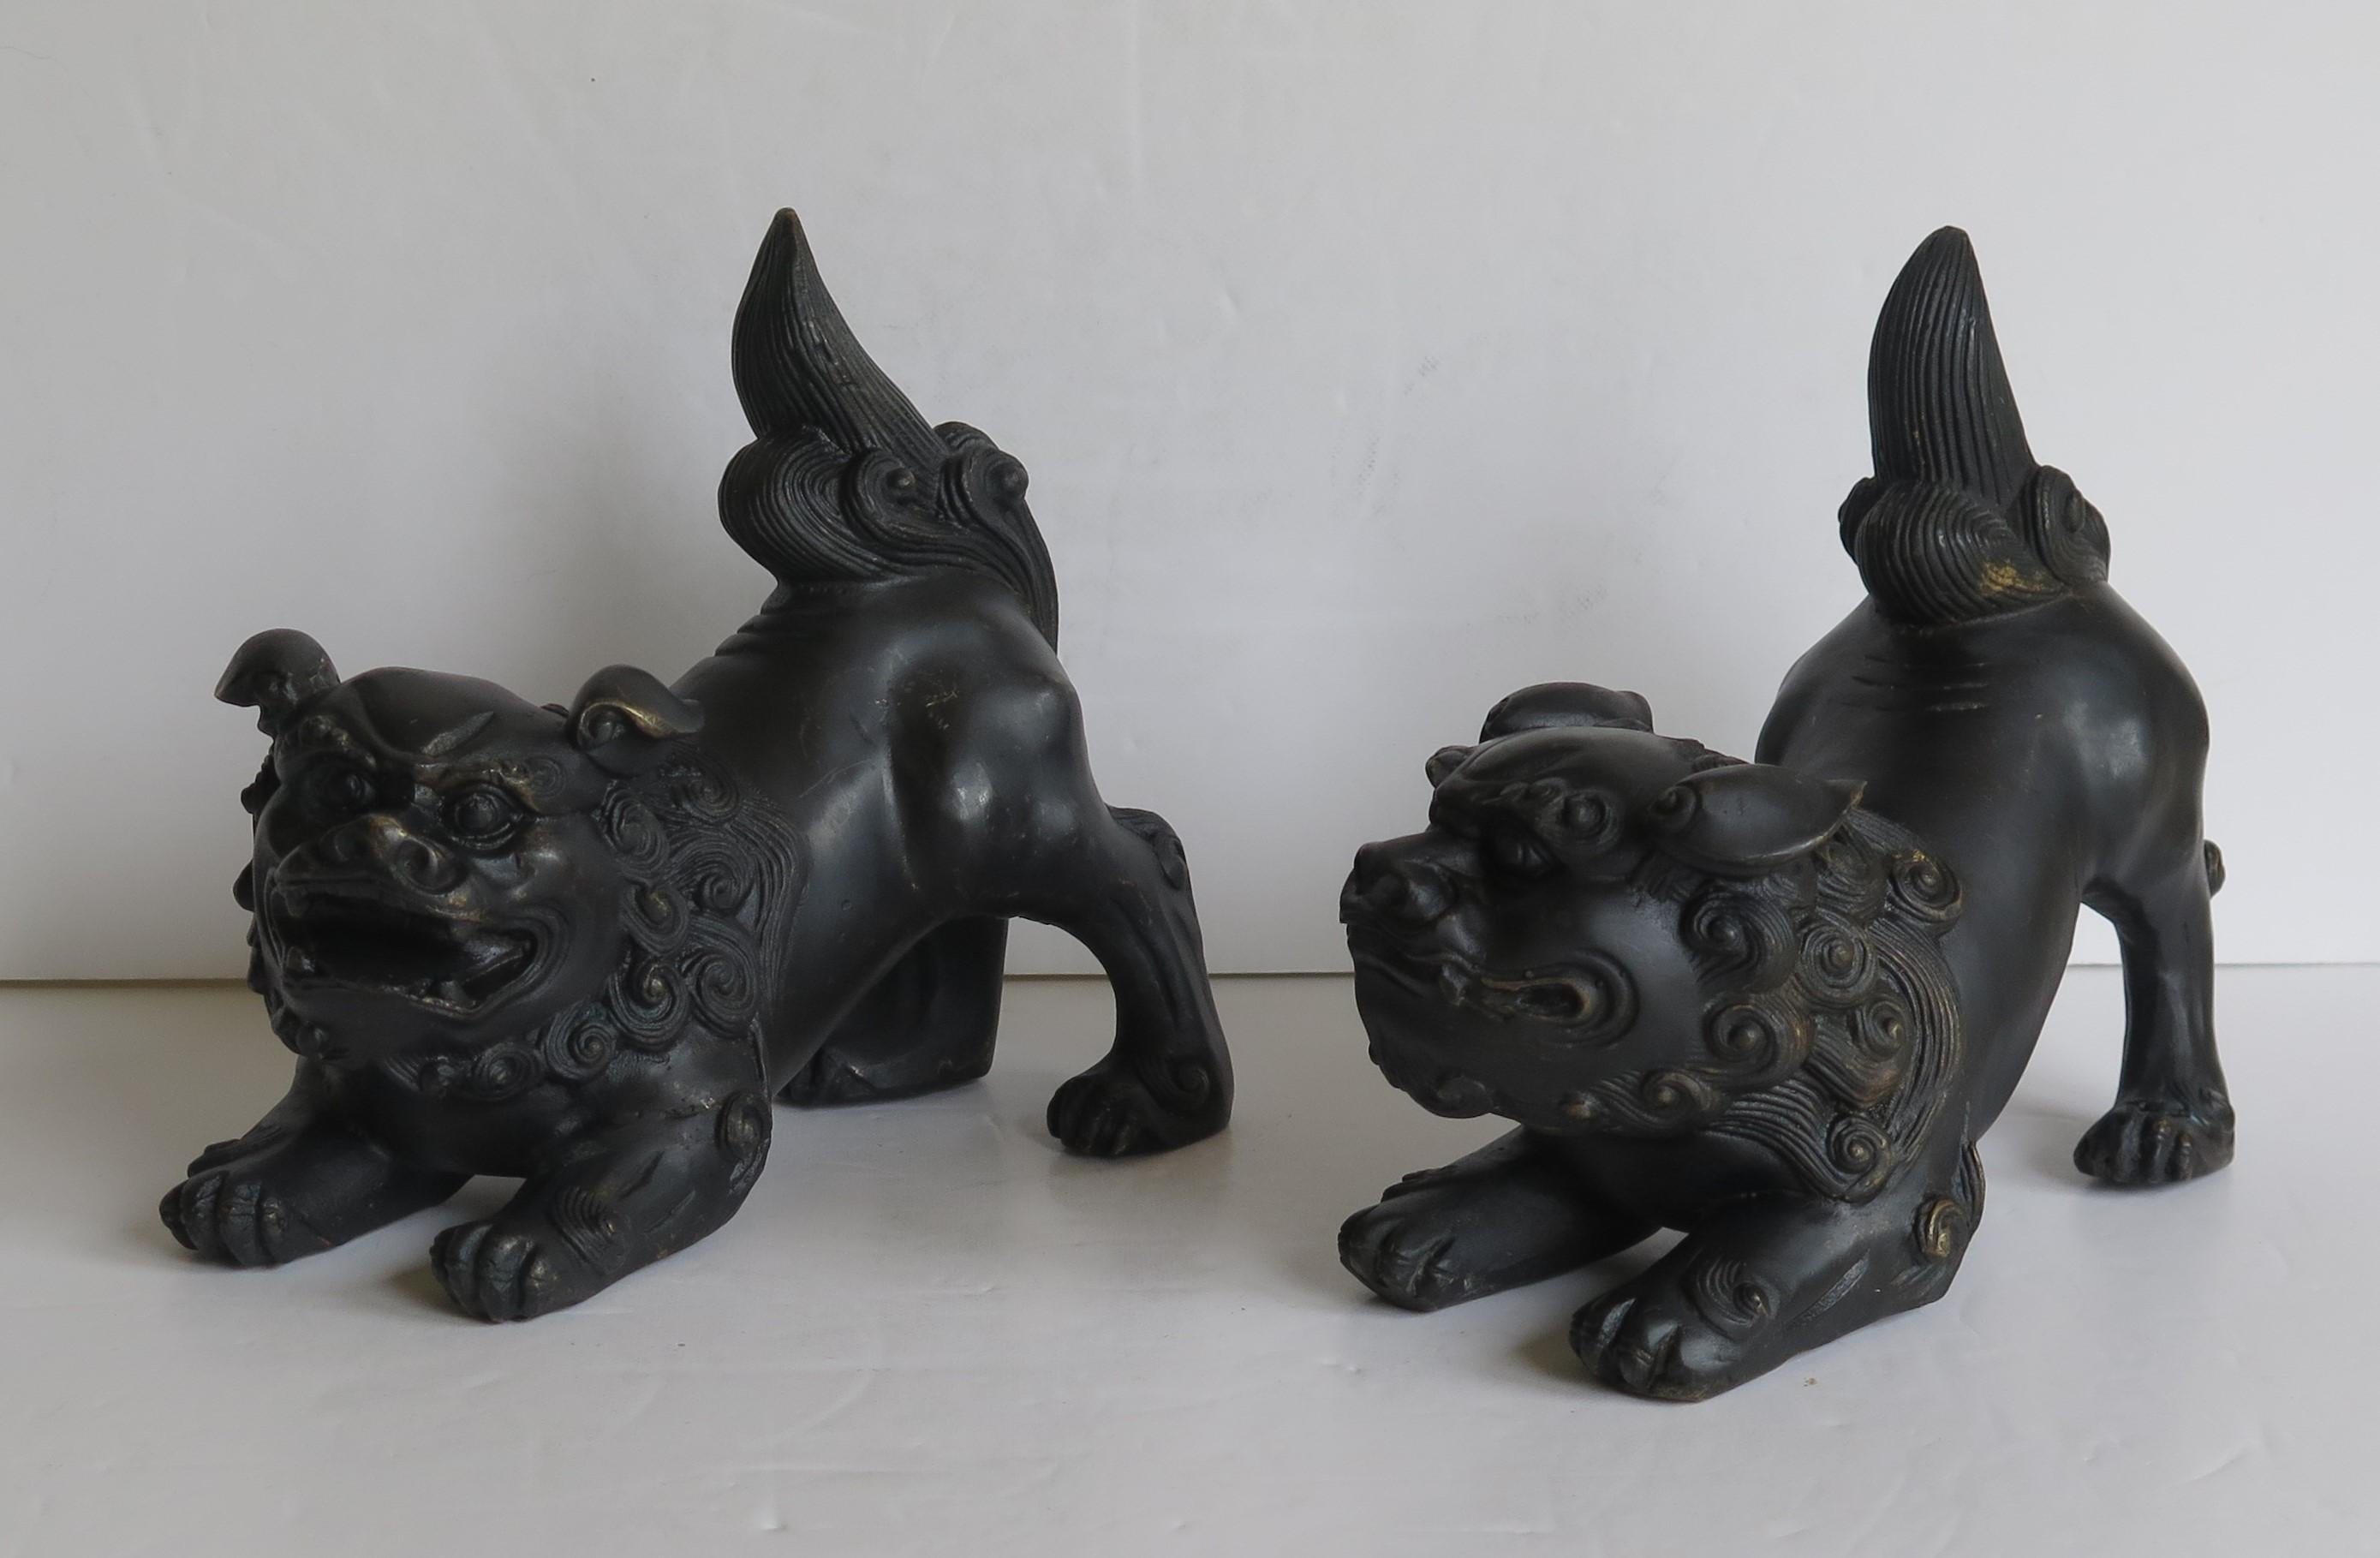 These are a very good pair of antique Chinese foo or lion dog sculptures, sometimes called temple lions, made of bronze, with good detail, dating to the 19th century, Qing period.

They are a male and female pair, the male with the slightly larger